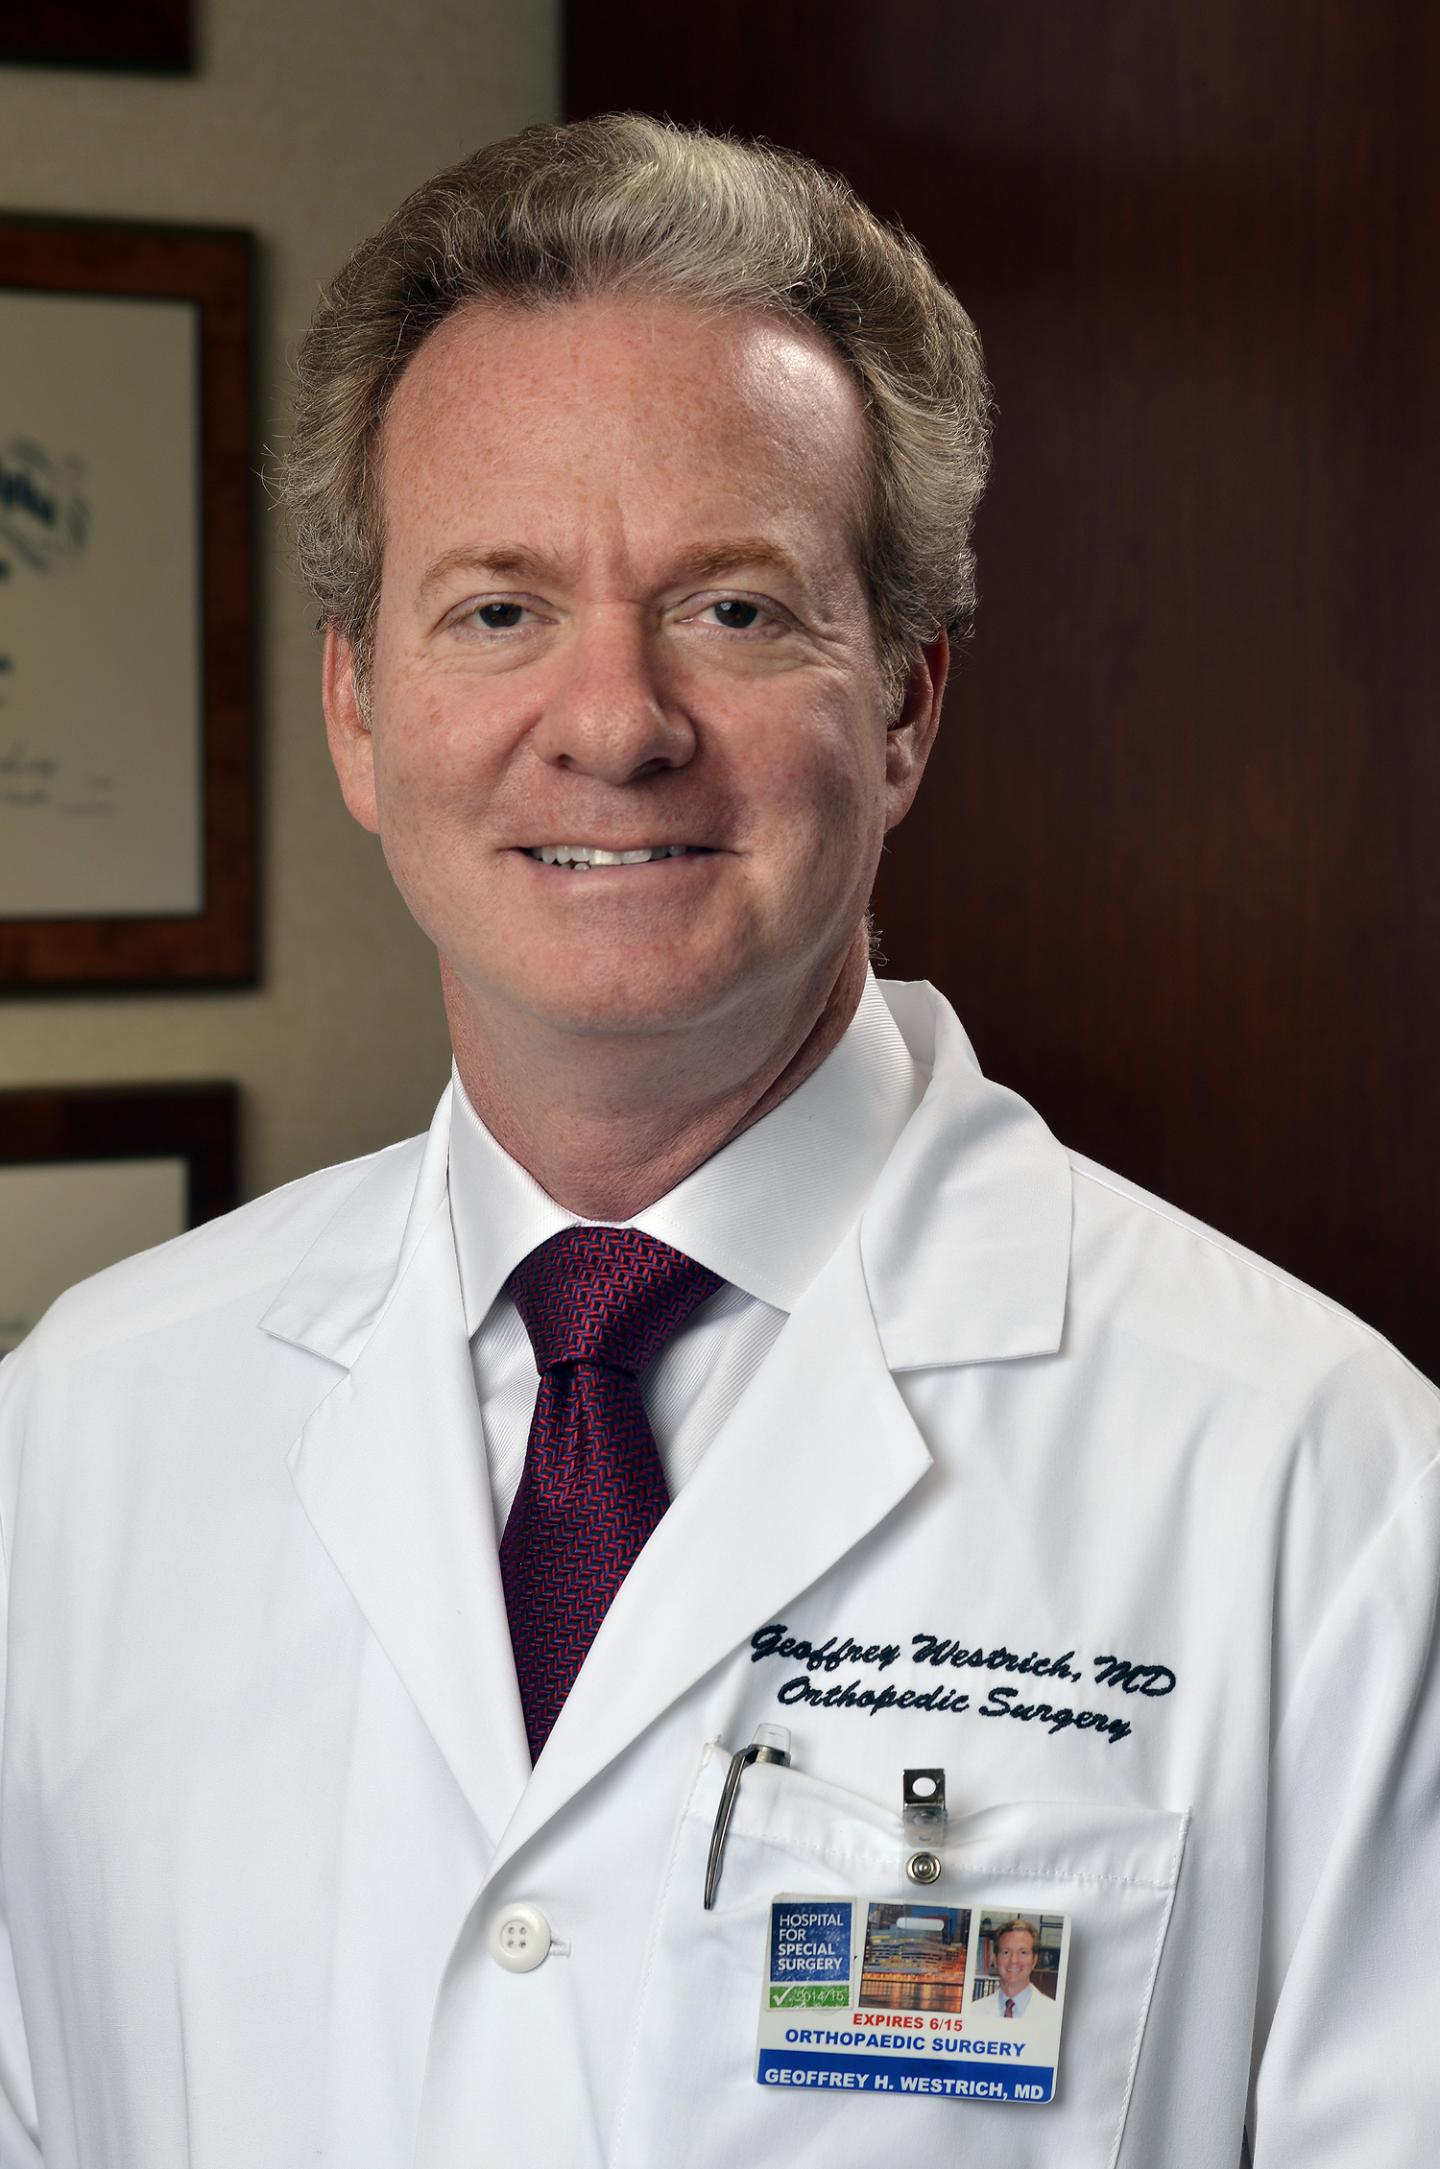 Geoffrey Westrich, M.D., Hospital for Special Surgery